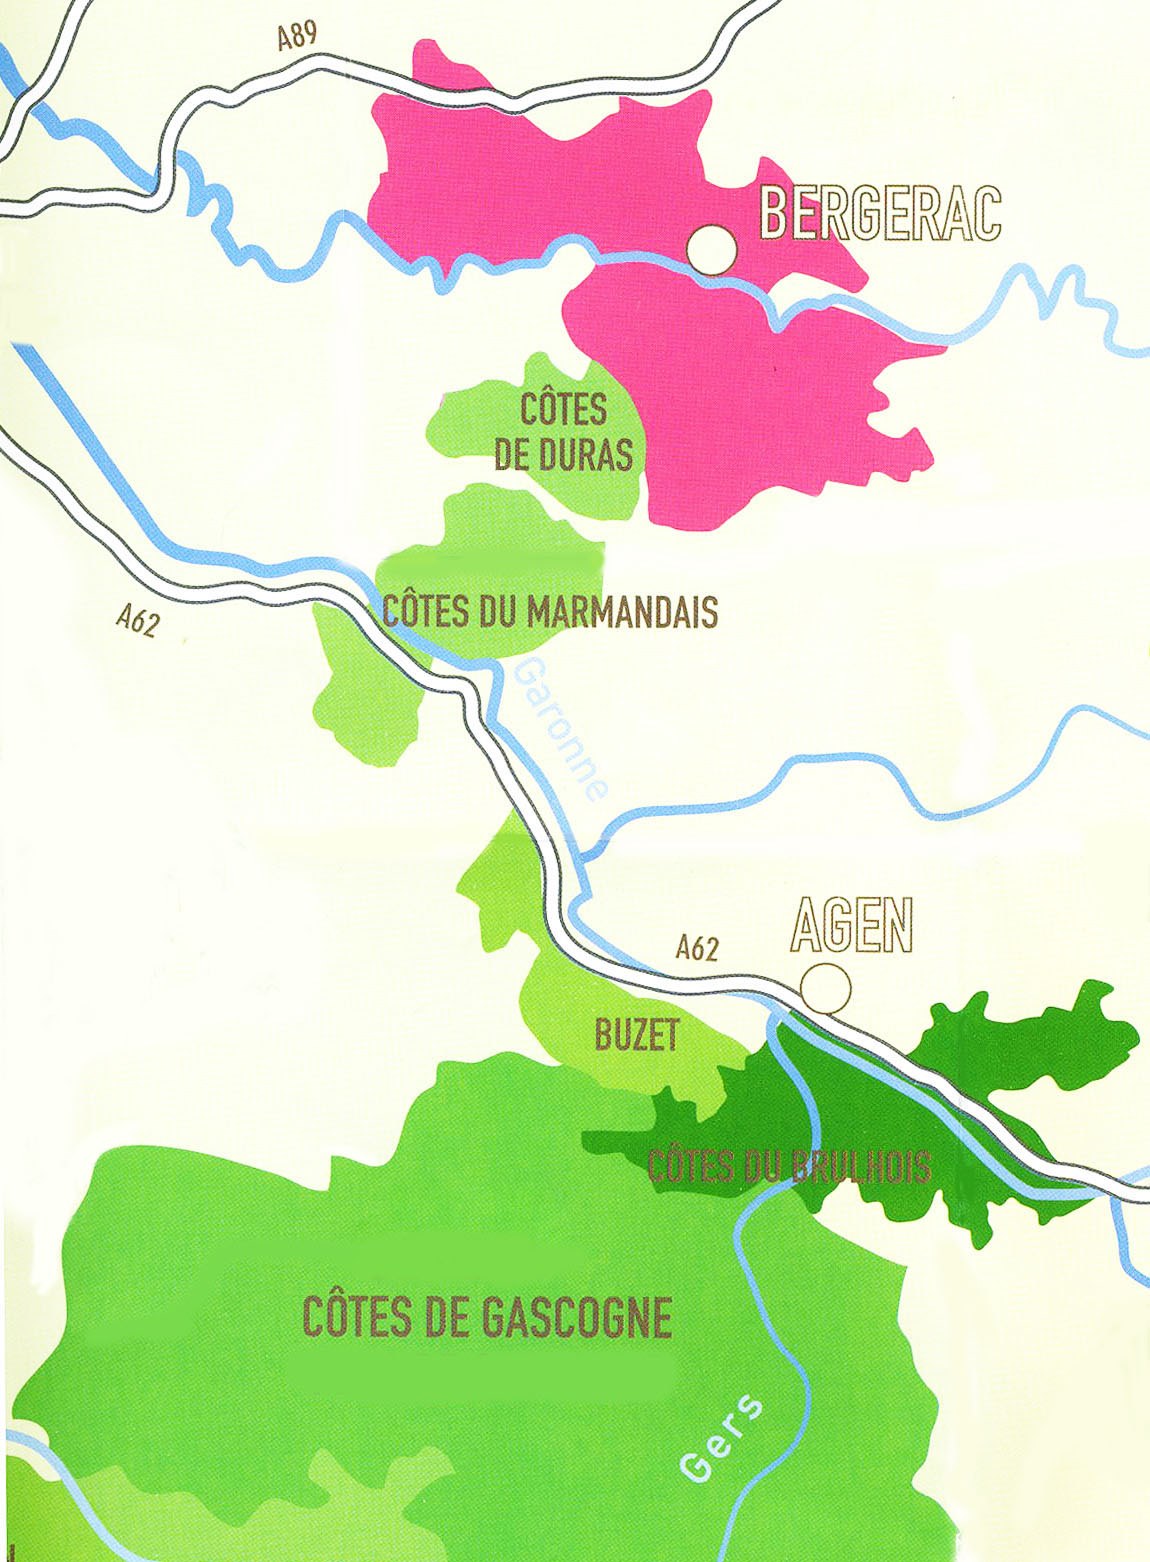 Beyond Bordeaux Satellites: Gascony - to Articles - Feature Bergerac - International GuildSomm From Neal Charles